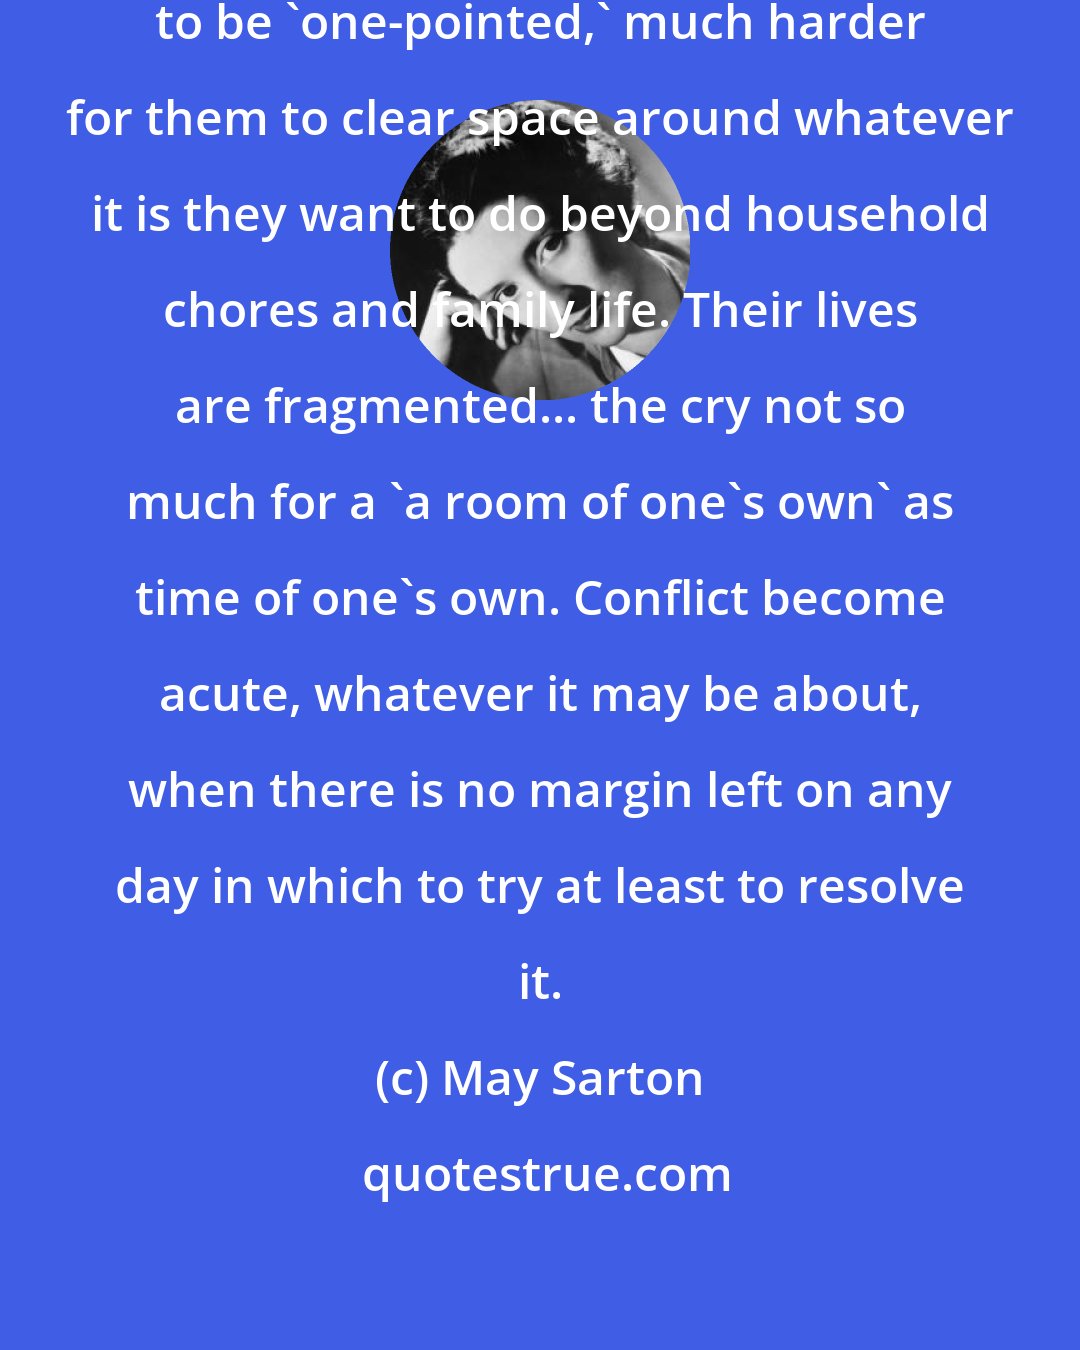 May Sarton: It is harder for women, perhaps to be 'one-pointed,' much harder for them to clear space around whatever it is they want to do beyond household chores and family life. Their lives are fragmented... the cry not so much for a 'a room of one's own' as time of one's own. Conflict become acute, whatever it may be about, when there is no margin left on any day in which to try at least to resolve it.